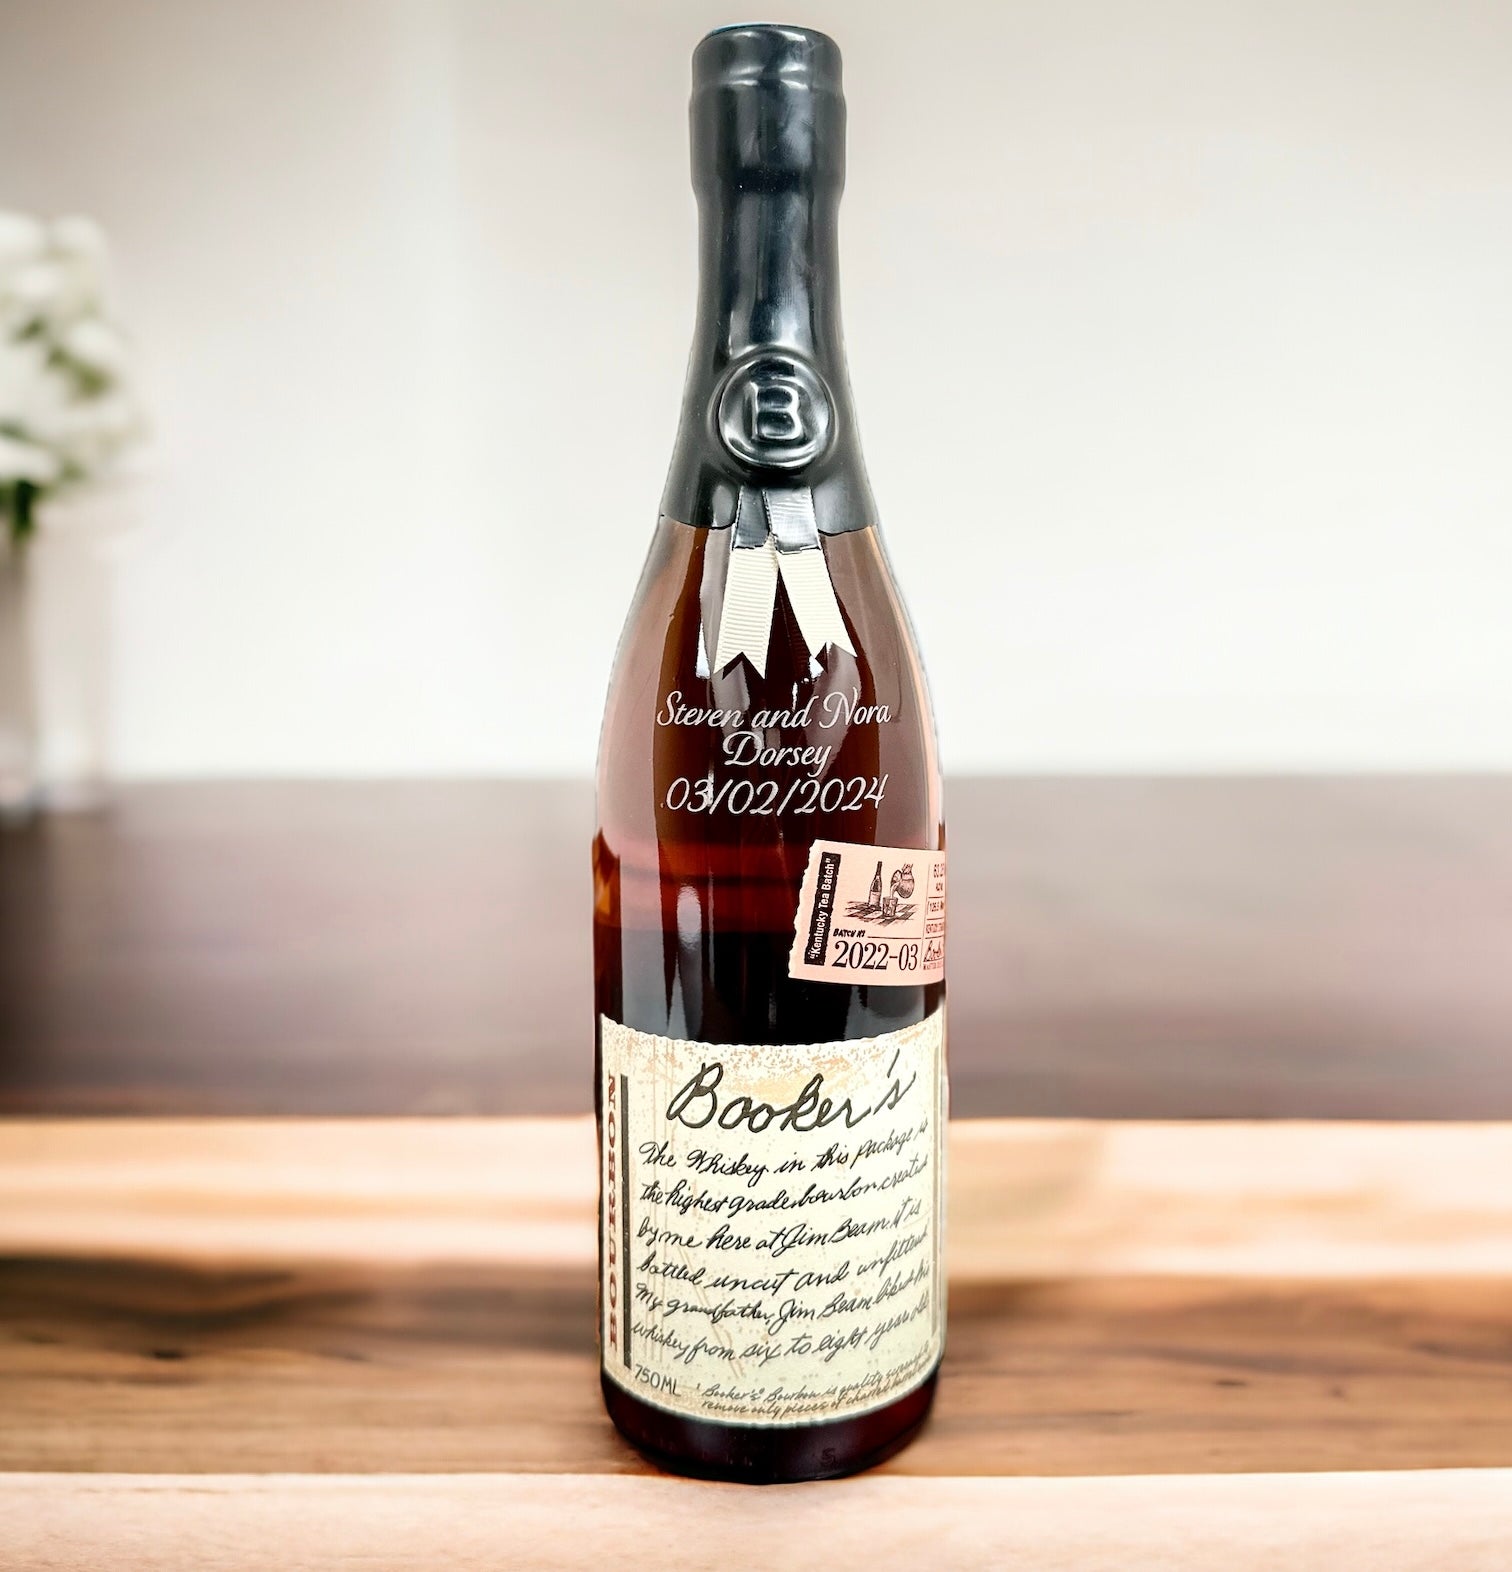 Booker's 30th Anniversary Limited Edition Kentucky Bourbon Whiskey - Bottle Engraving